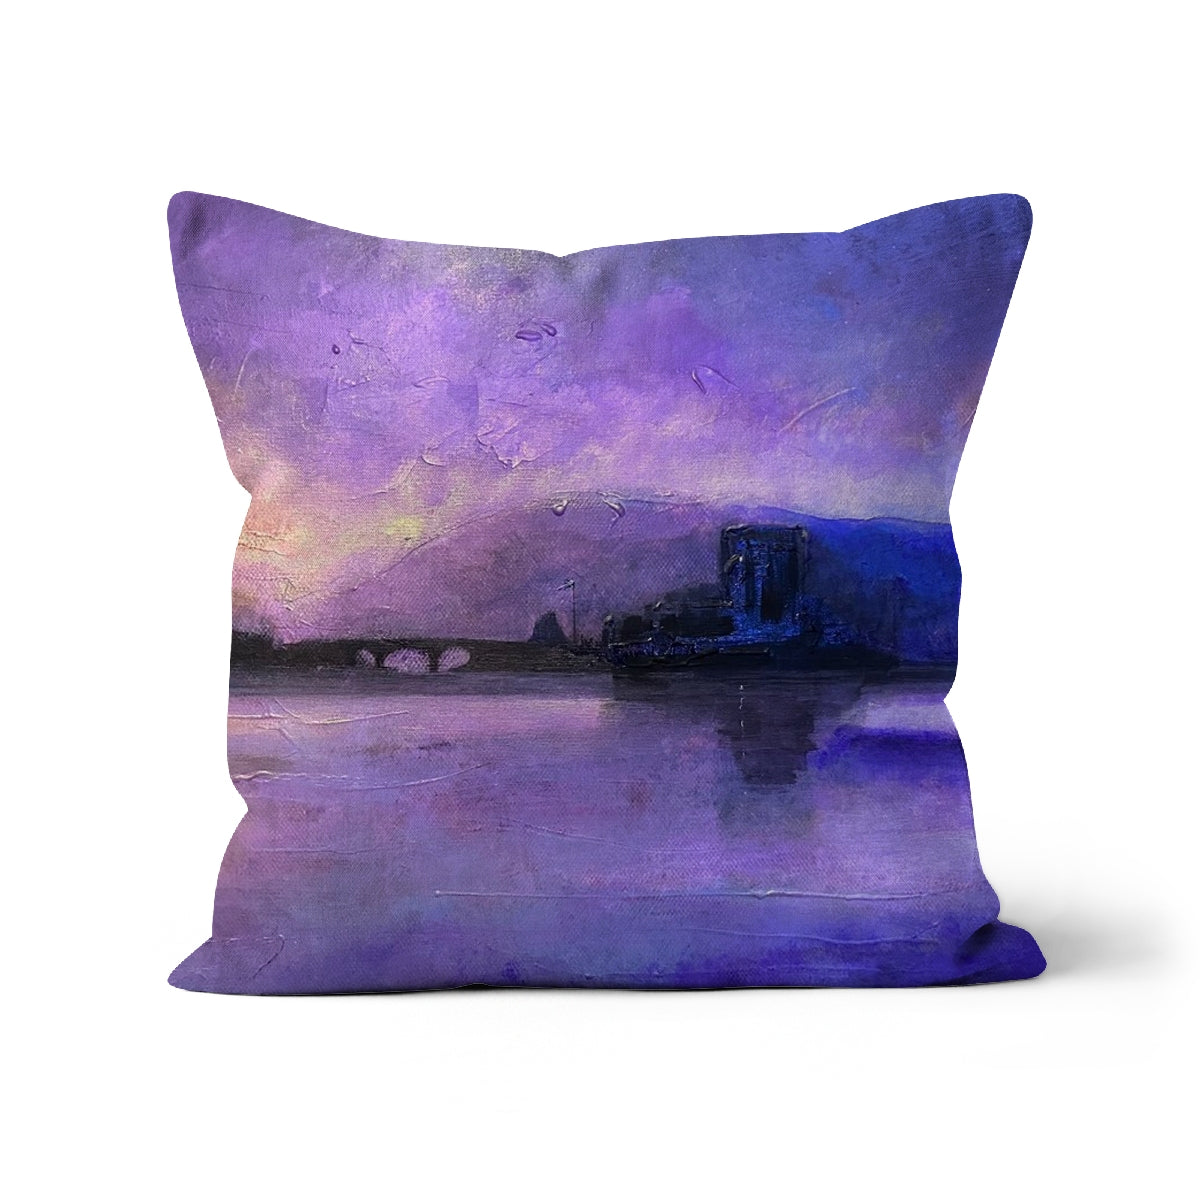 Eilean Donan Castle Moonset Art Gifts Cushion-Cushions-Historic & Iconic Scotland Art Gallery-Linen-12"x12"-Paintings, Prints, Homeware, Art Gifts From Scotland By Scottish Artist Kevin Hunter